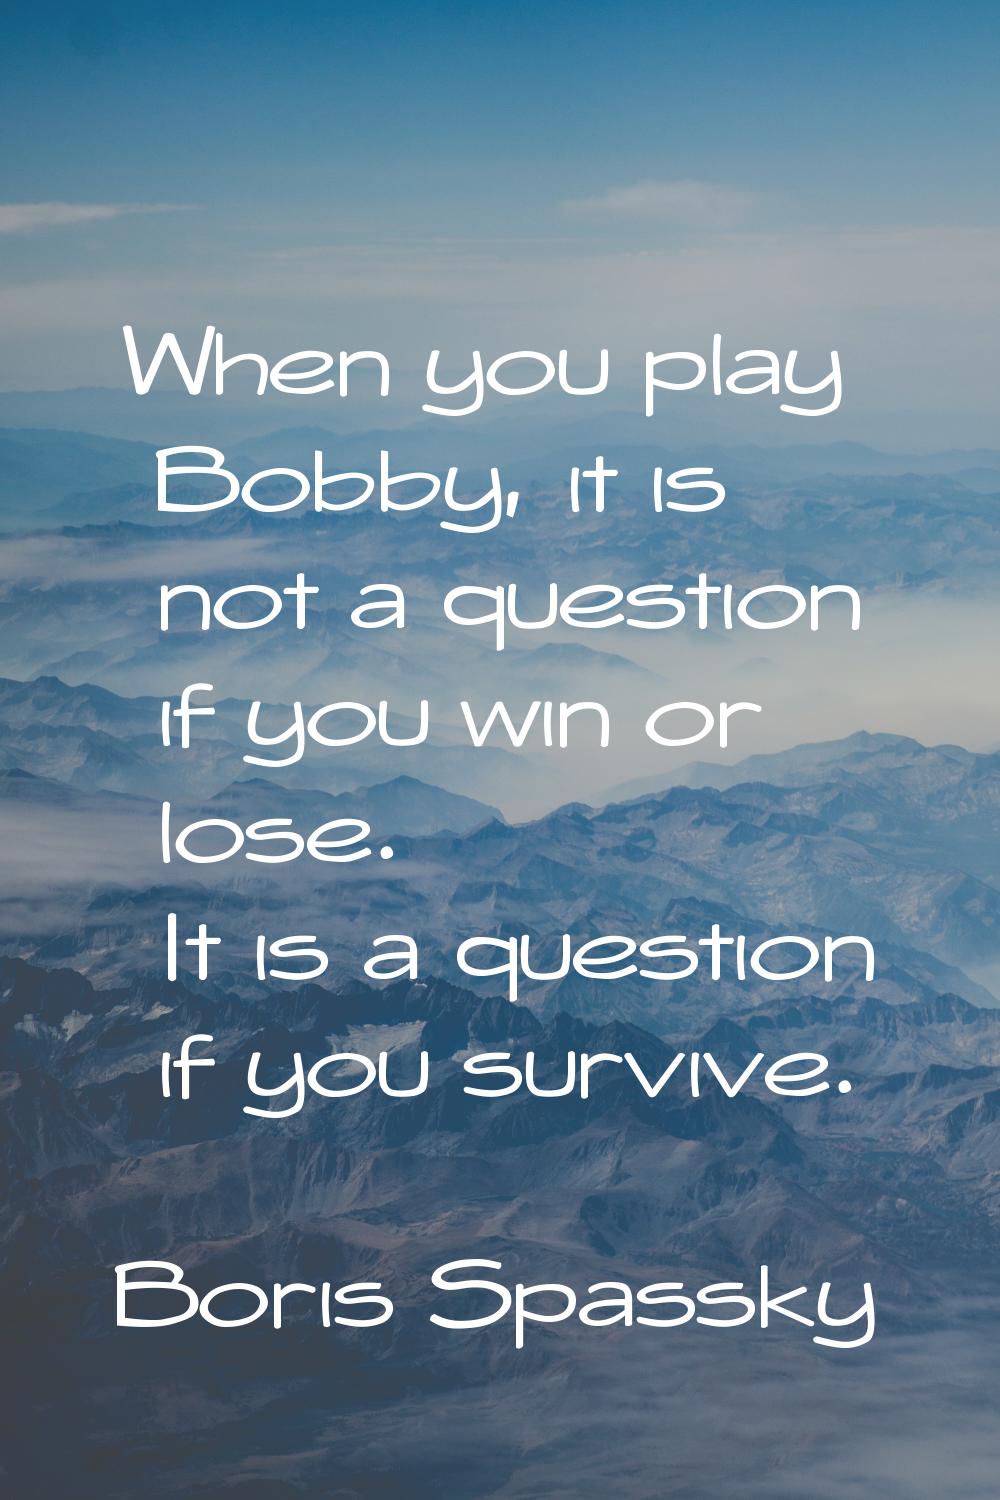 When you play Bobby, it is not a question if you win or lose. It is a question if you survive.